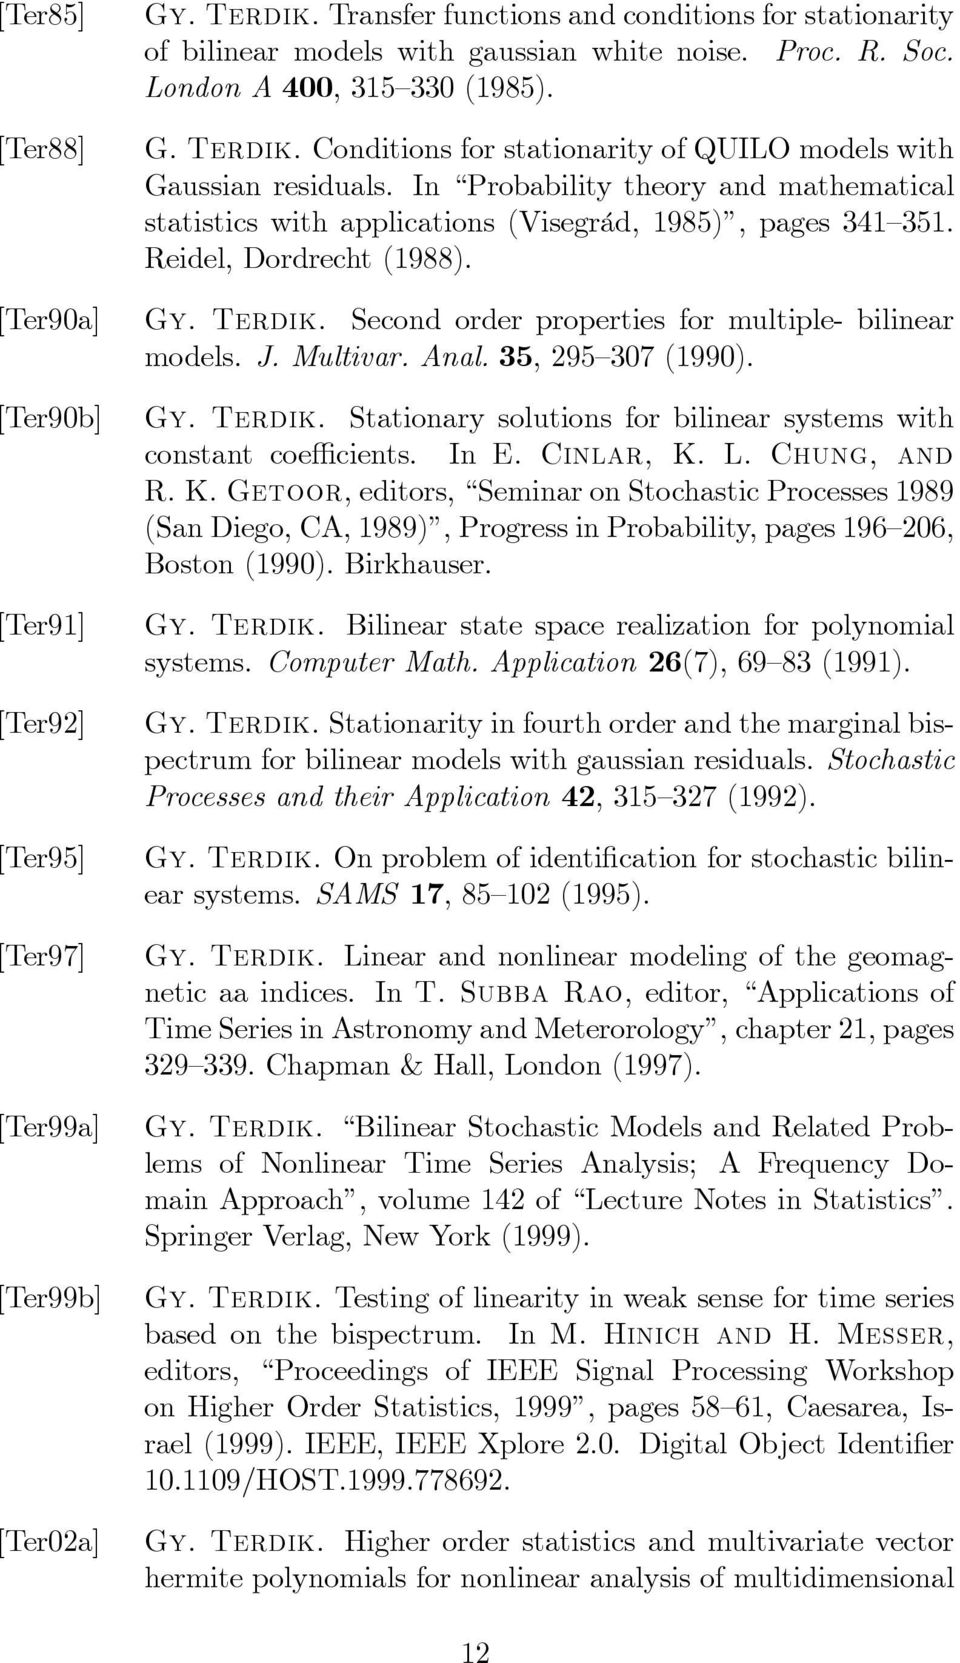 Second order properties for multiple- bilinear models. J. Multivar. Anal. 35, 295 307 (1990). [Ter90b] Gy. Terdik. Stationary solutions for bilinear systems with constant coe cients. In E. Cinlar, K.